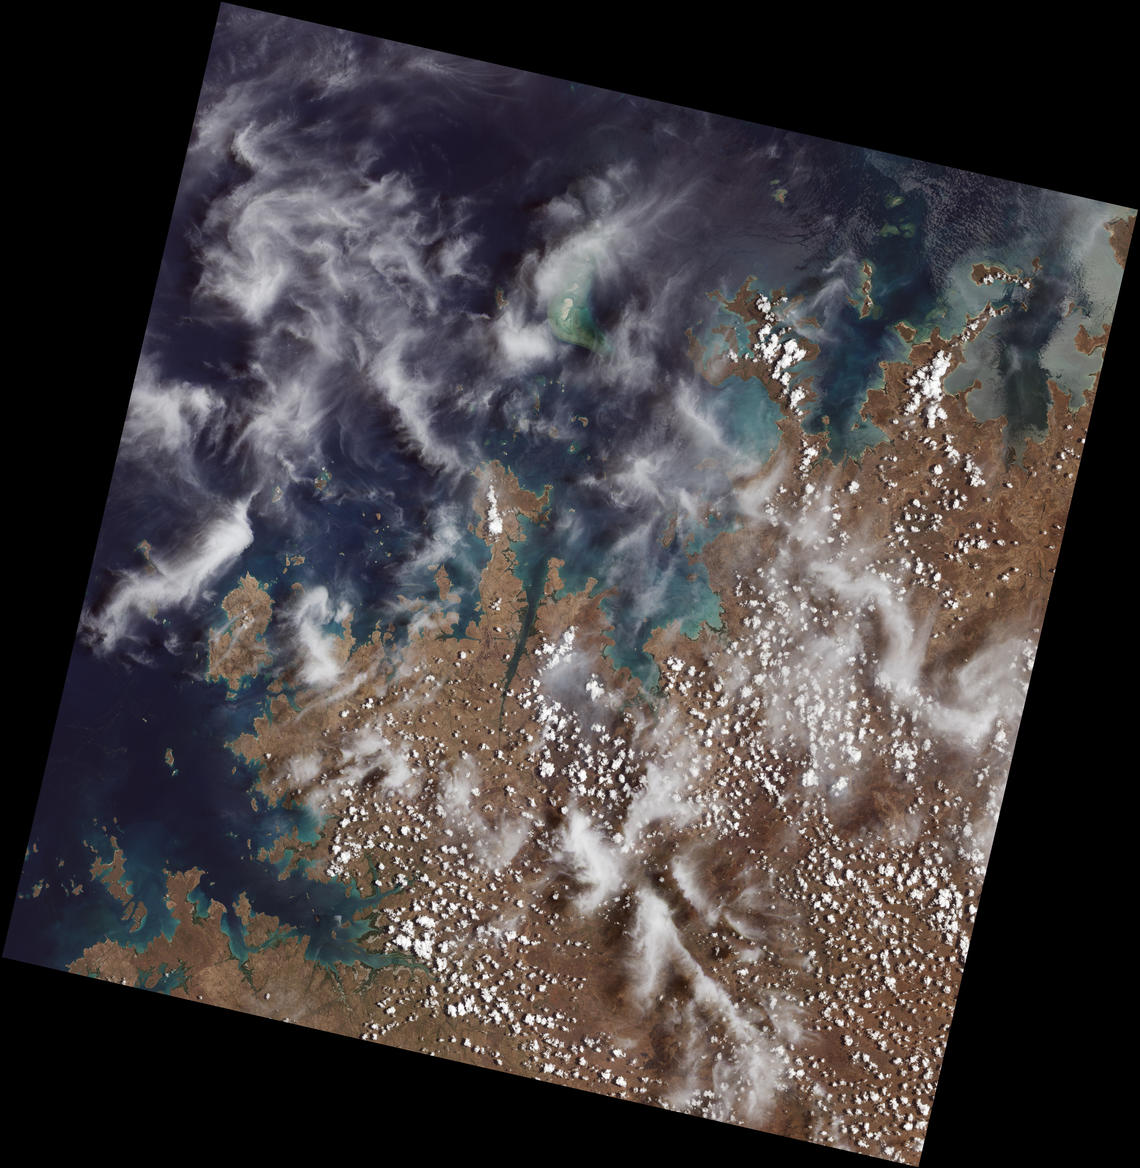 The first image collected by Landsat 9